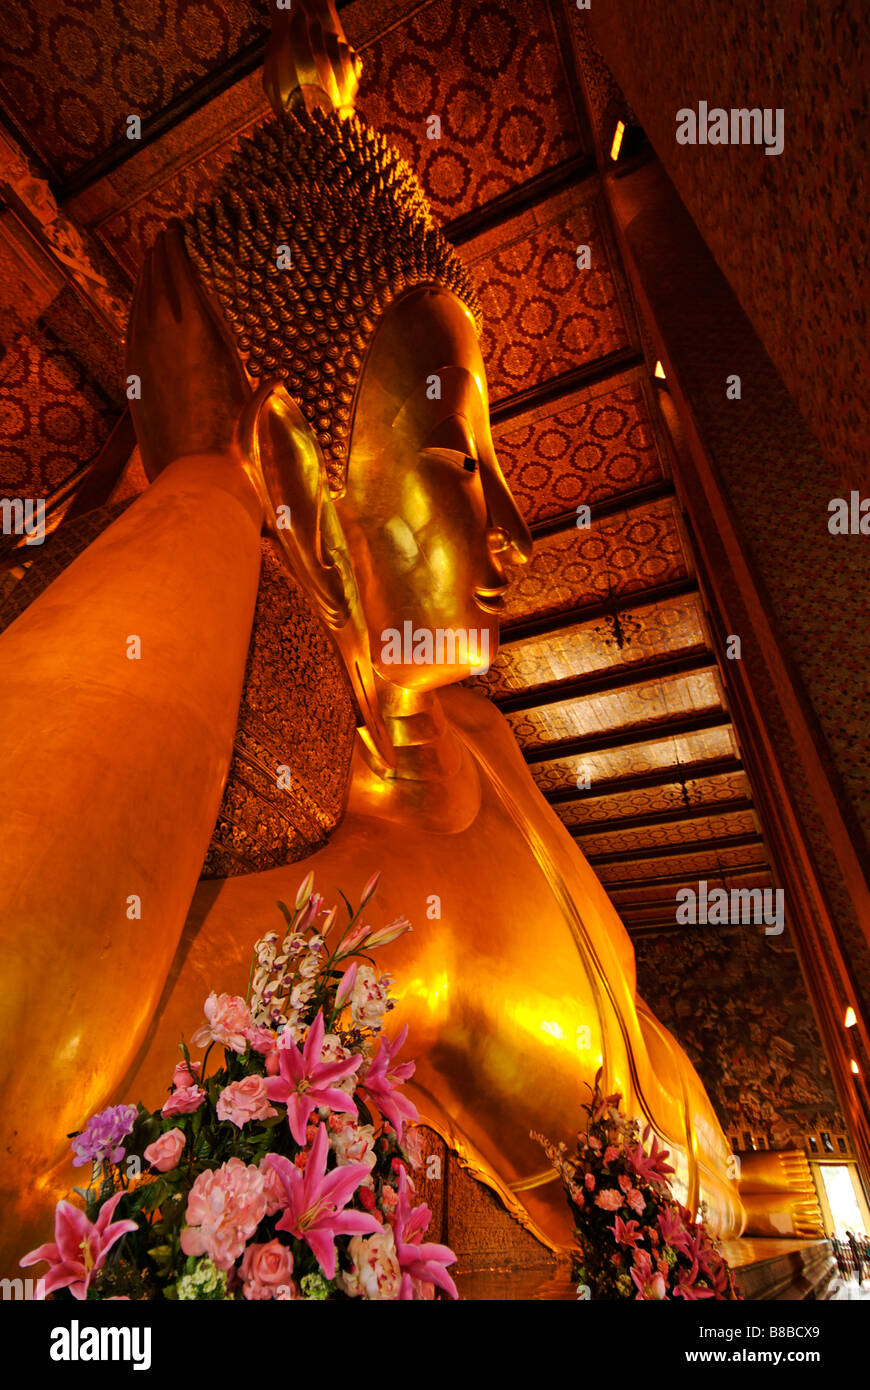 Reclining golden buddha statue in Wat Pho temple Phra Nakorn district in central Bangkok Thailand Stock Photo